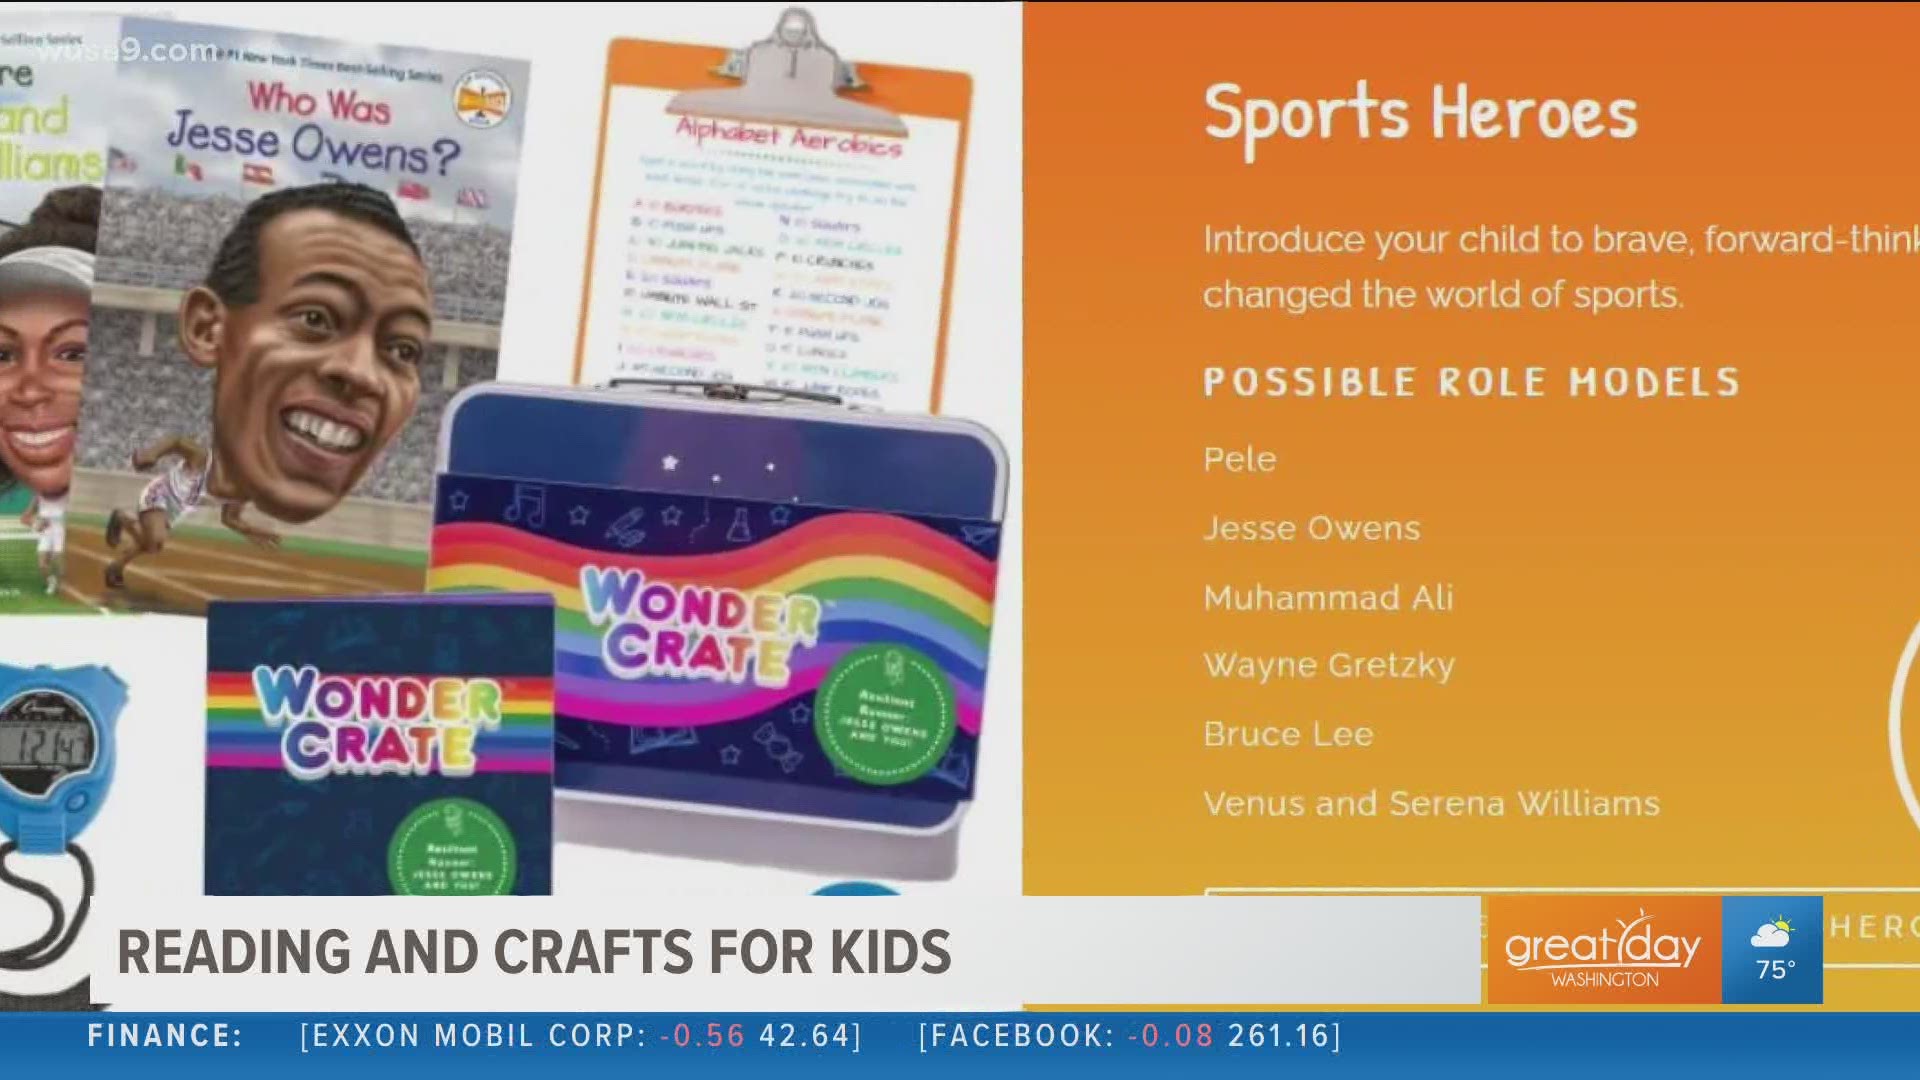 Founder of Wonder Crate, Corrie Wiedmann explains what Wonder Crate is and how it benefits kids and parents.